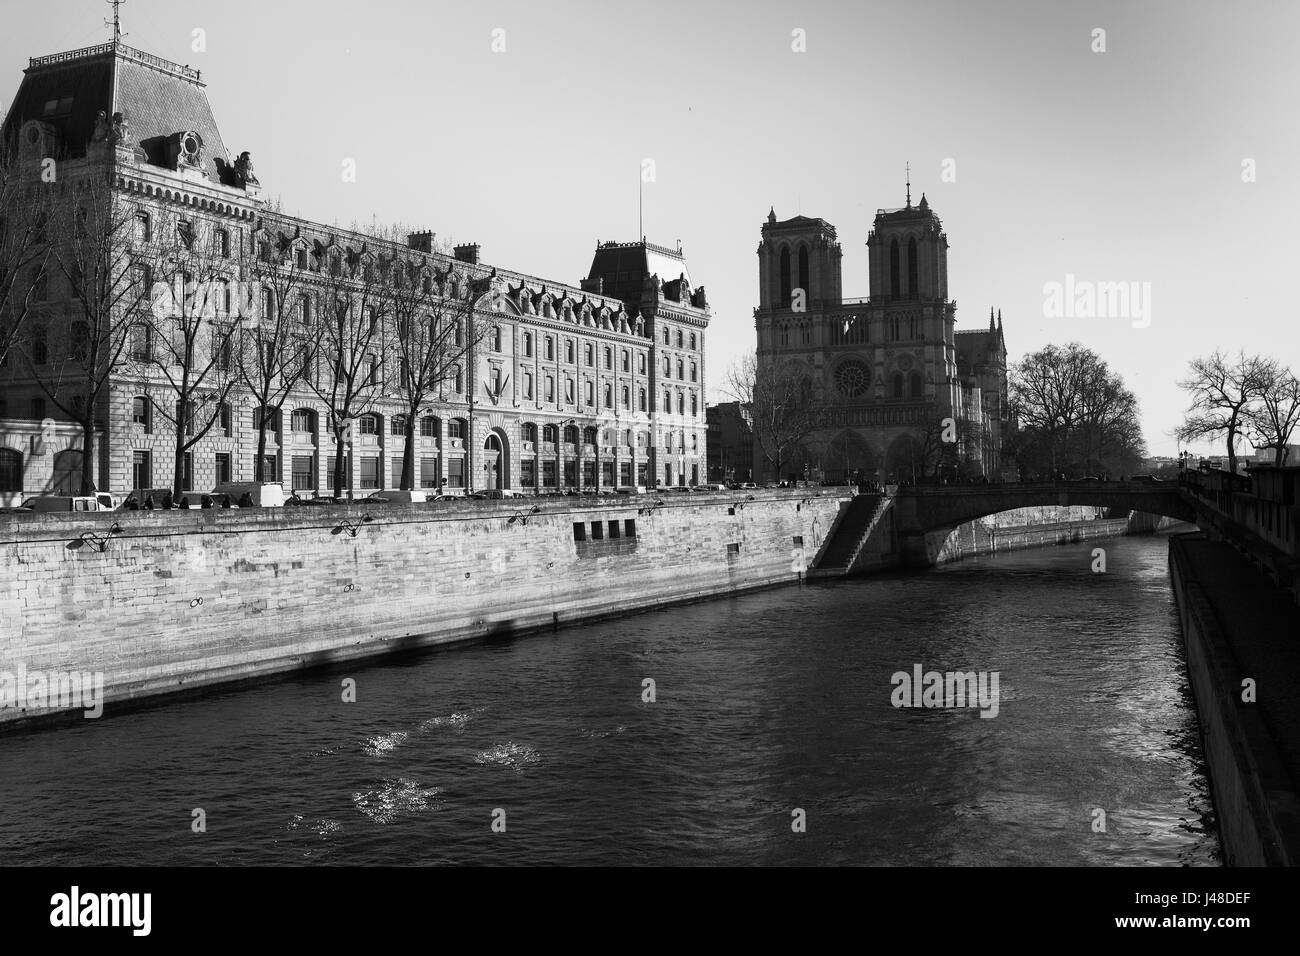 Black and white images of bridges on the Seine river in Paris. Stock Photo